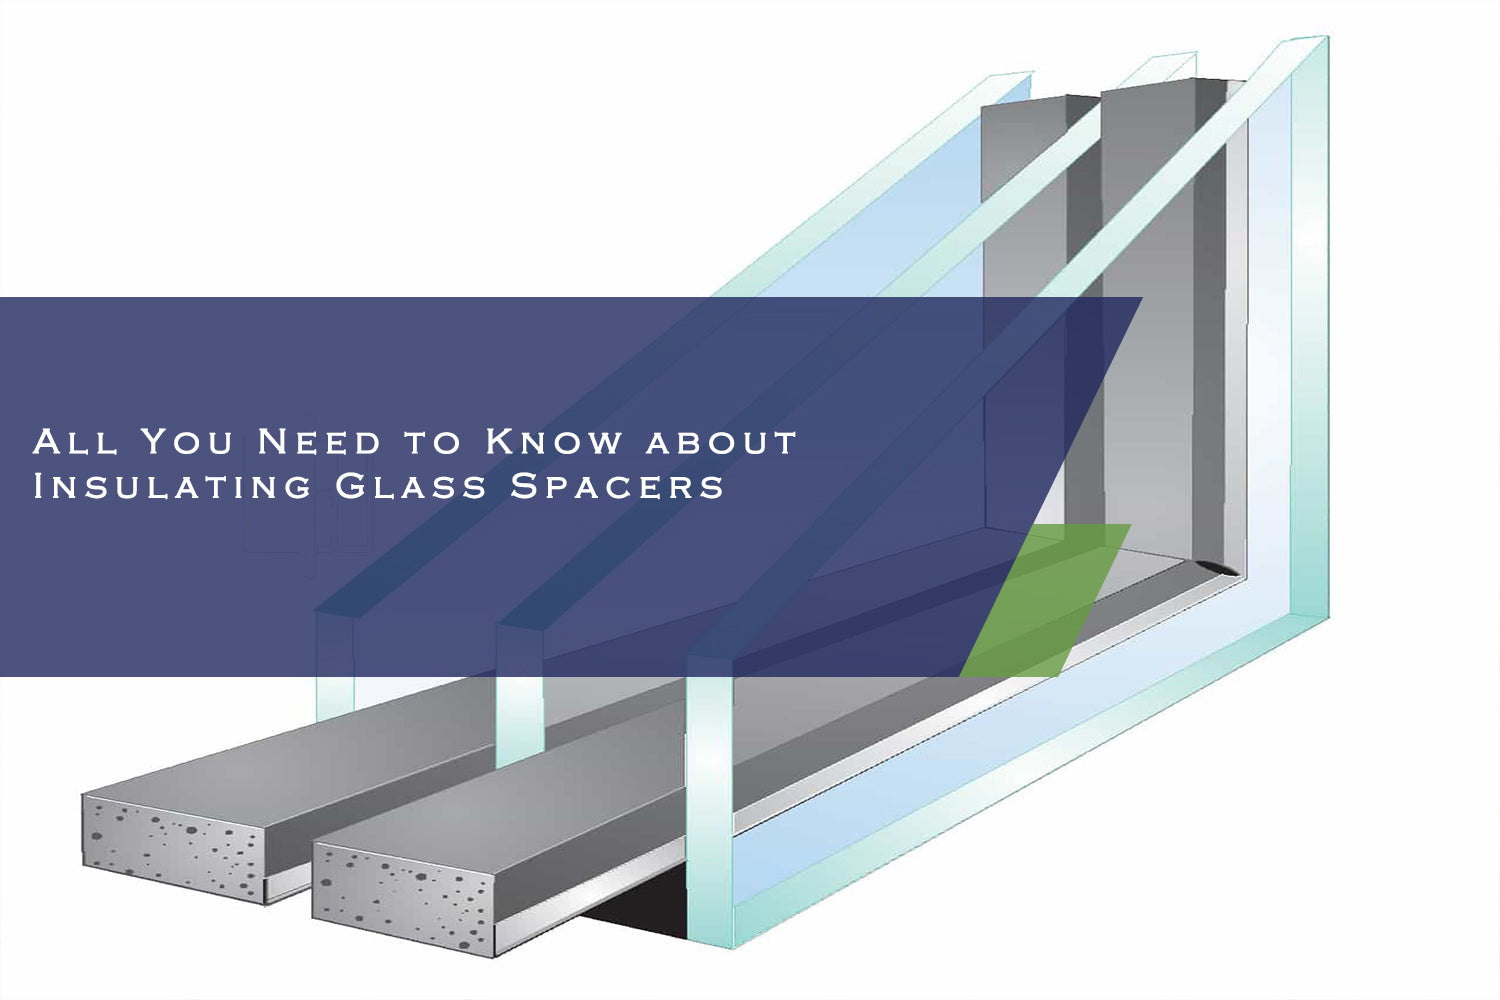 All You Need to Know about Insulating Glass Spacers